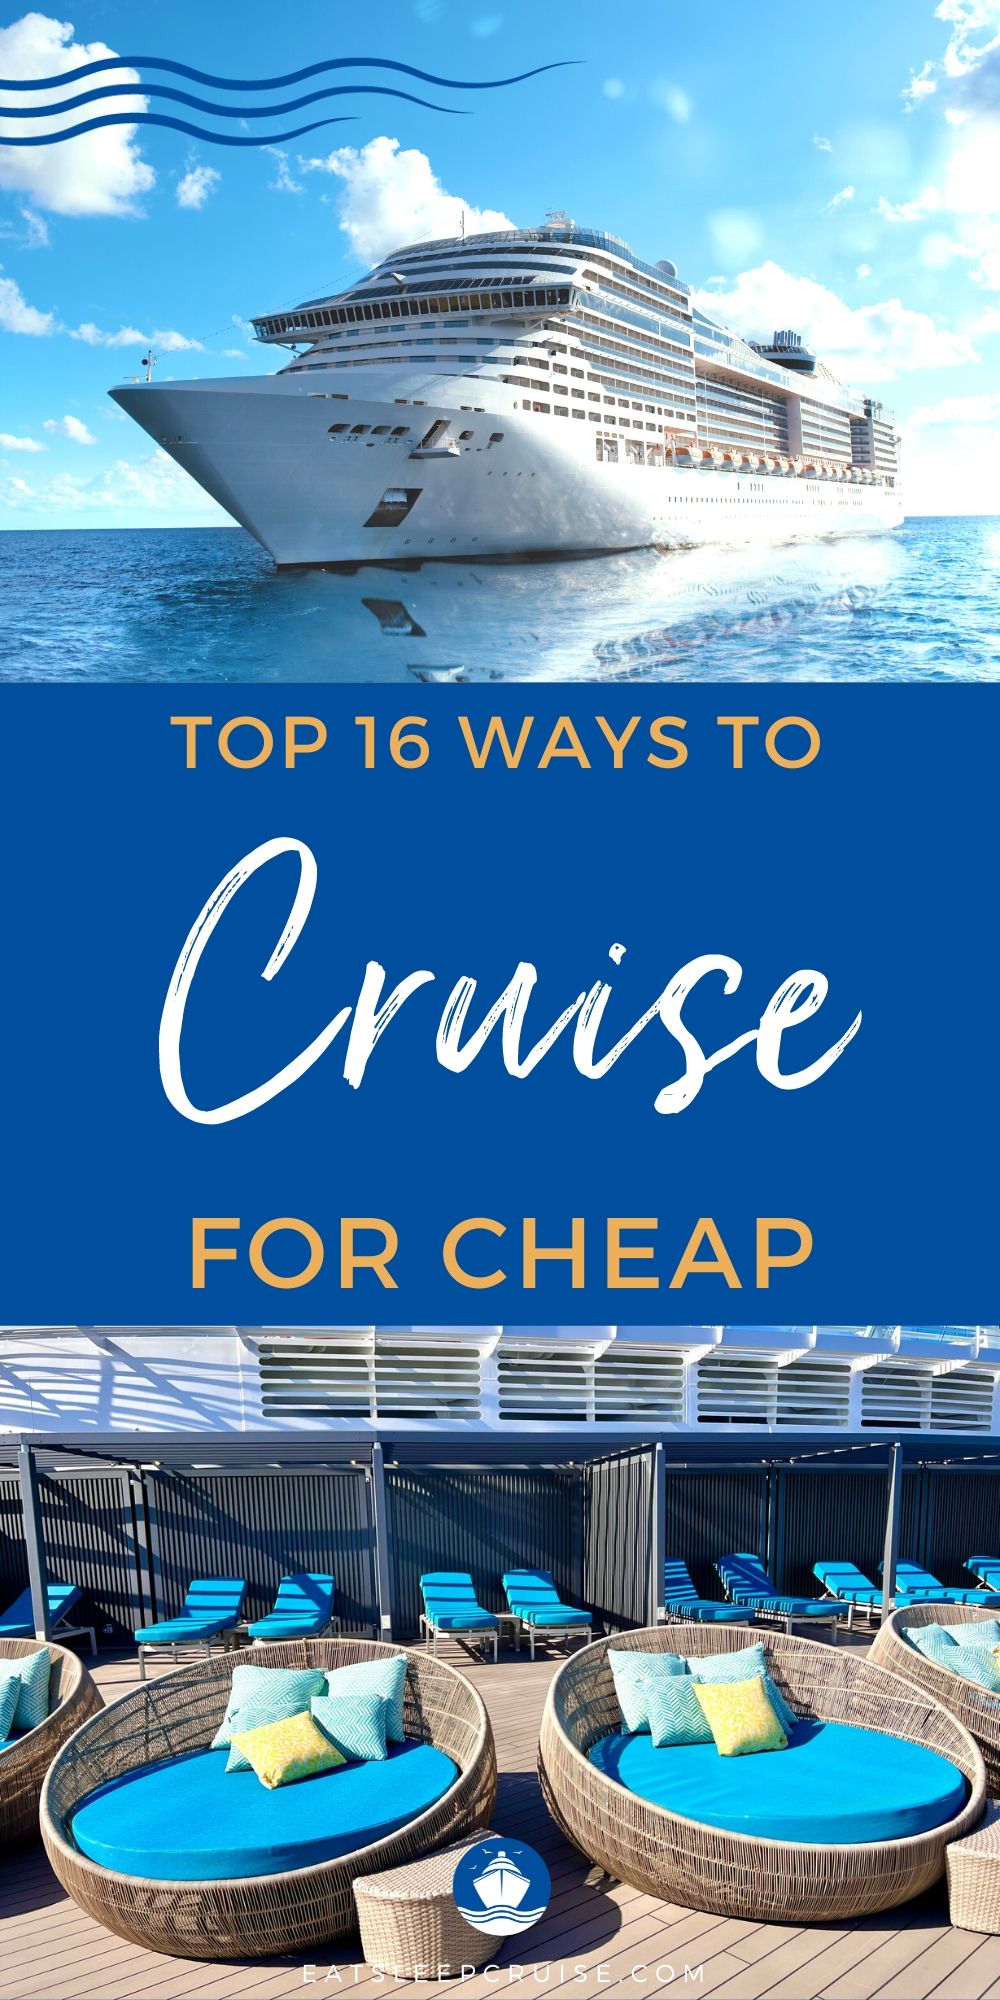 Top 16 Ways You Can Cruise for Cheap